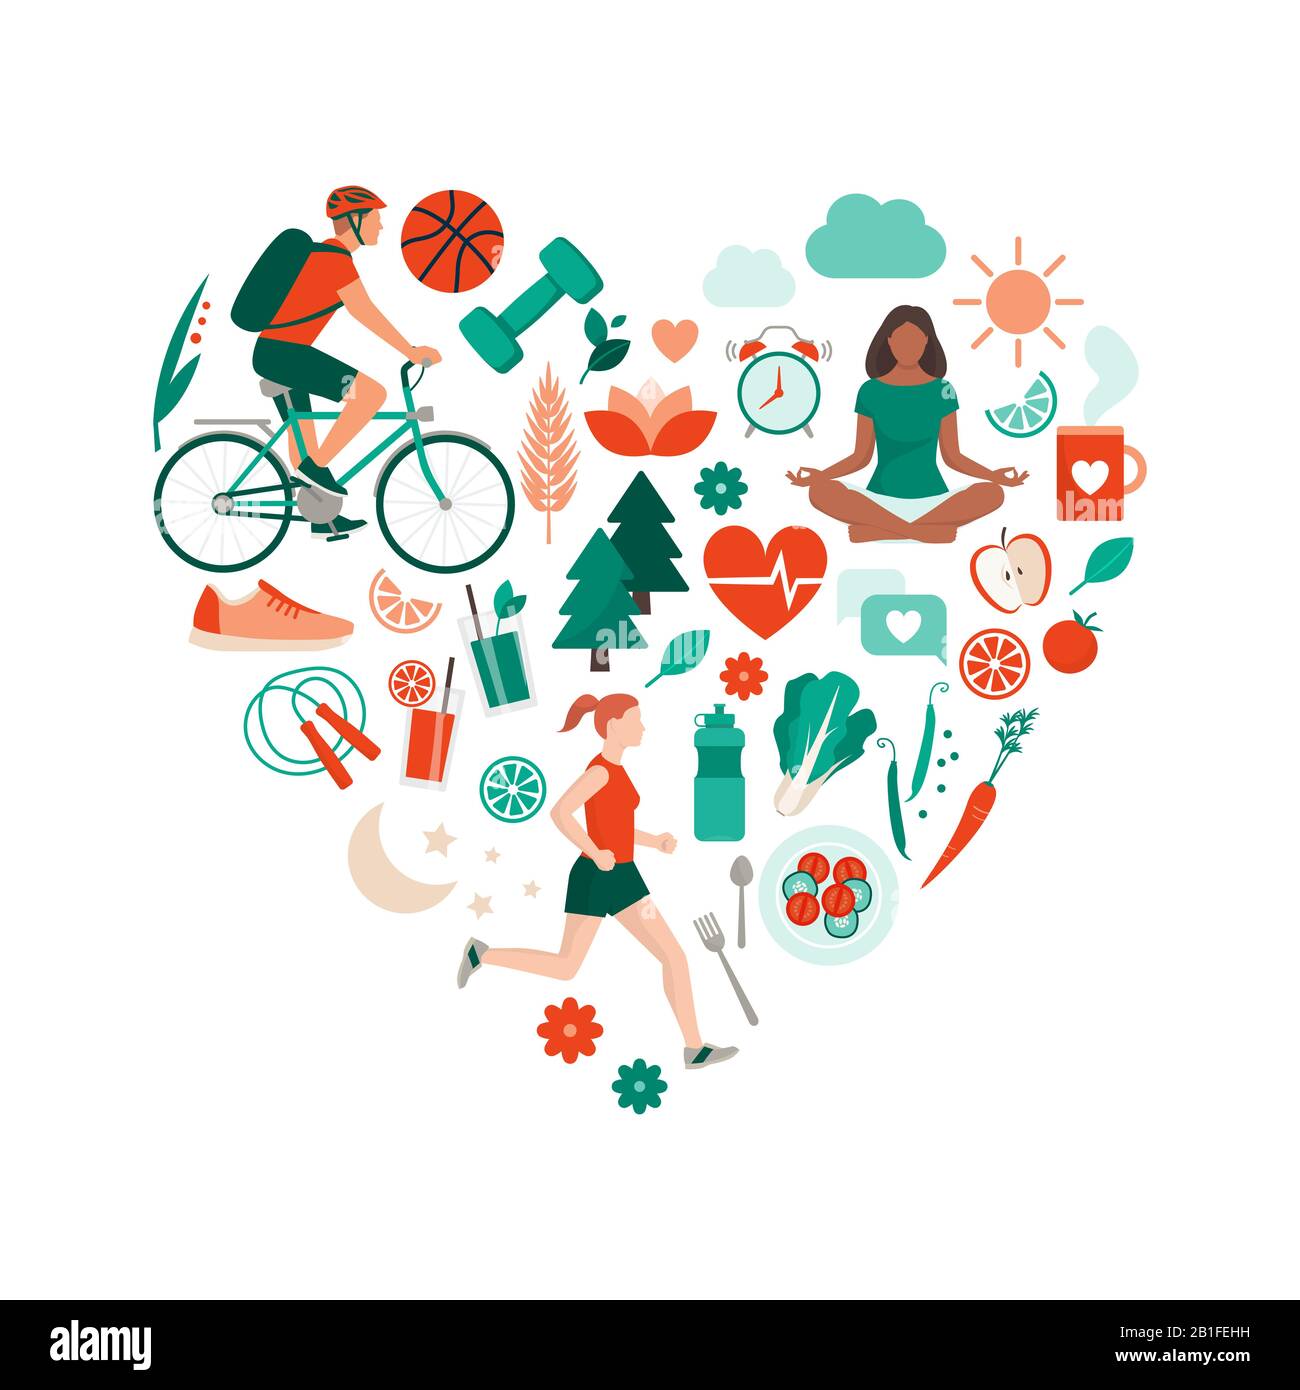 Healthy lifestyle and self-care concept with food, sports and nature icons arranged in a heart shape Stock Vector